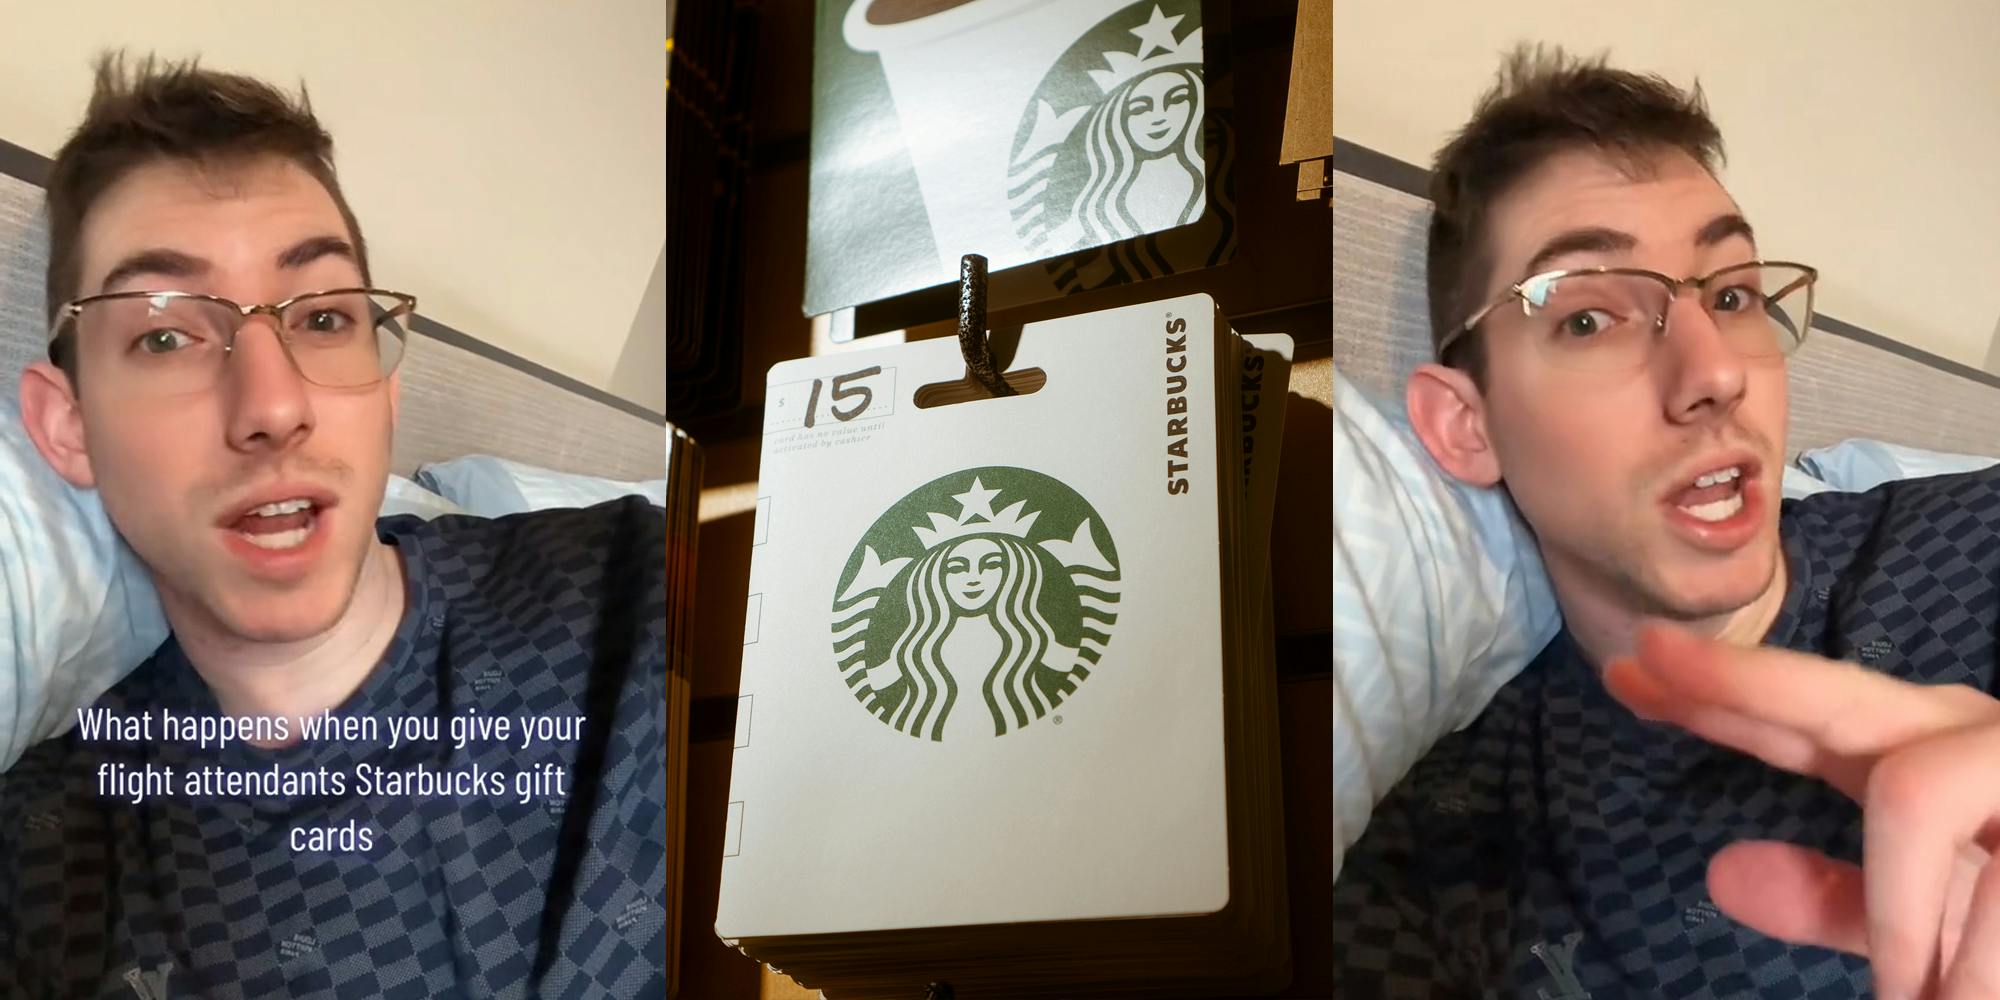 person speaking in bed with caption "What happens when you give your flight attendants Starbucks gift cards" (l) Starbucks $15 gift cards on hook (c) person speaking in bed pointing left (r)